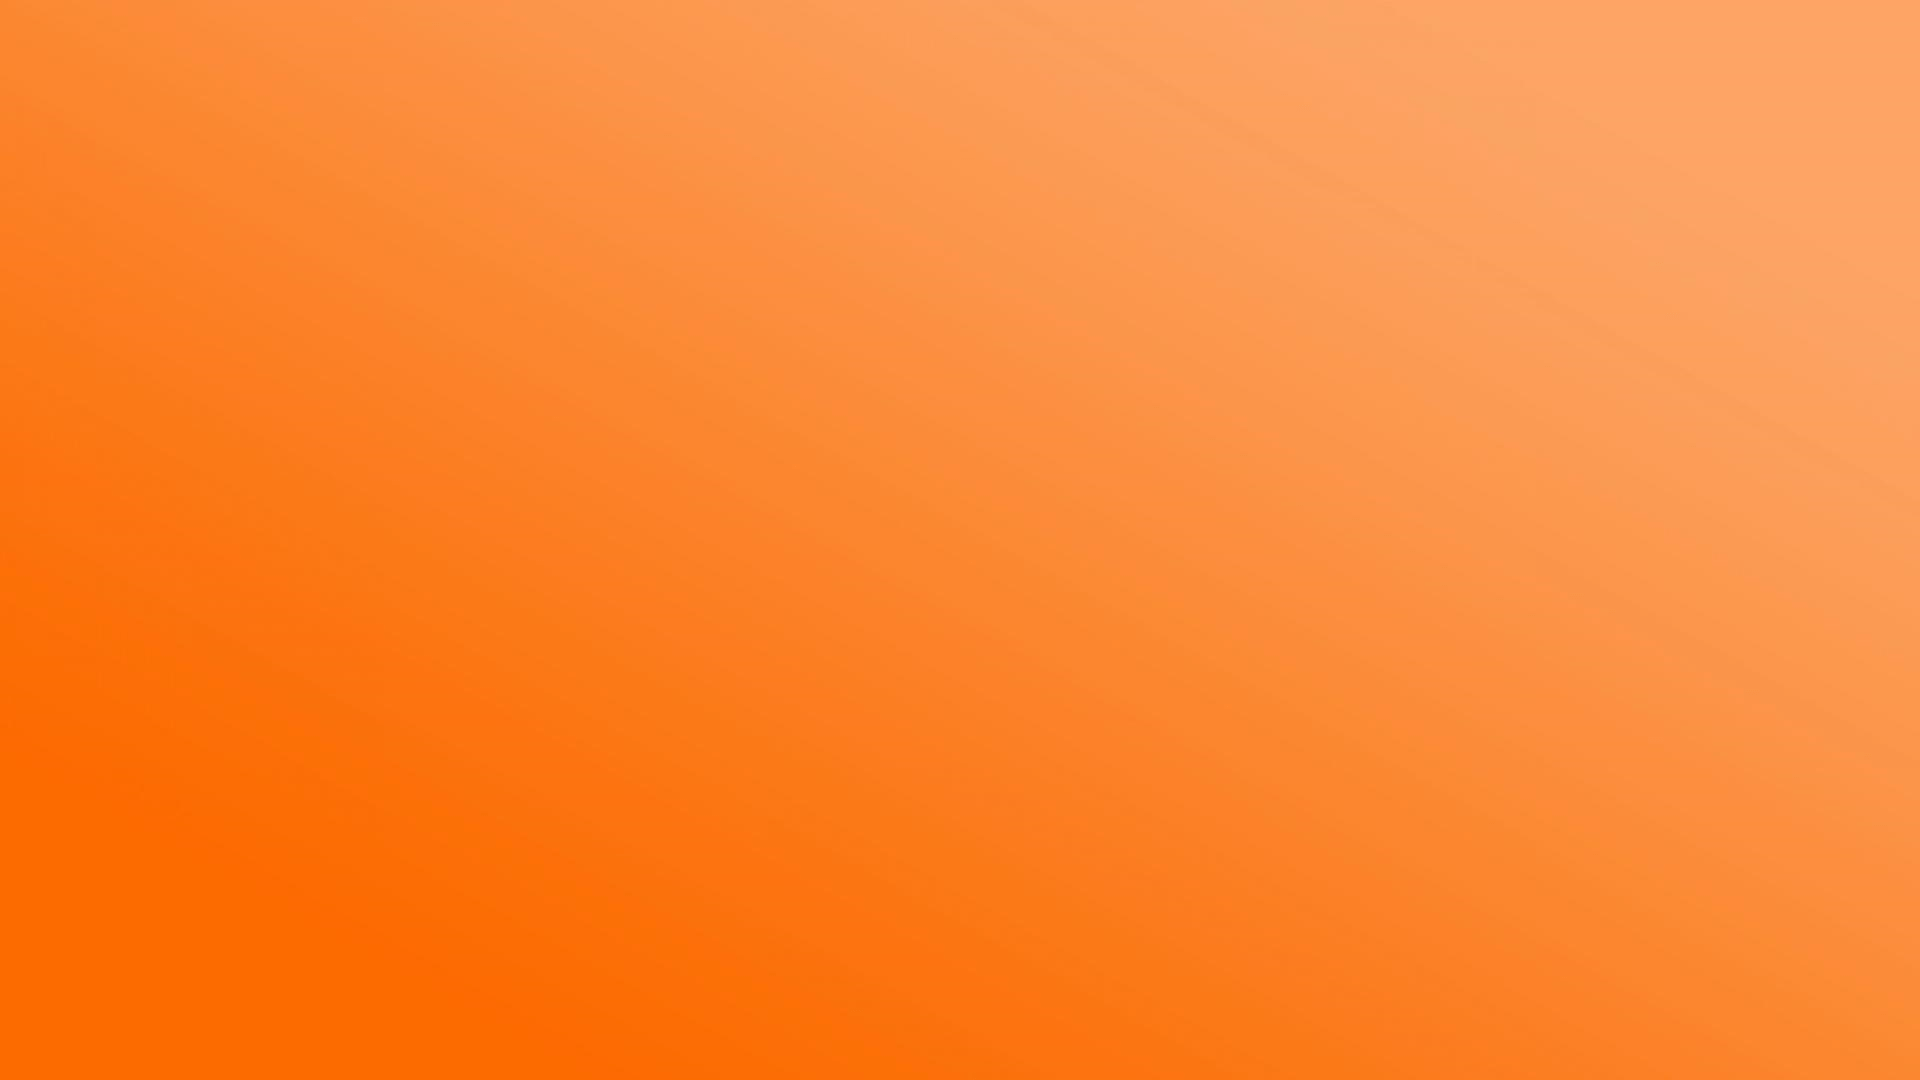 Orange Aesthetic Laptop Wallpapers Wallpaper Cave Search your top hd images for your phone, desktop or website. orange aesthetic laptop wallpapers